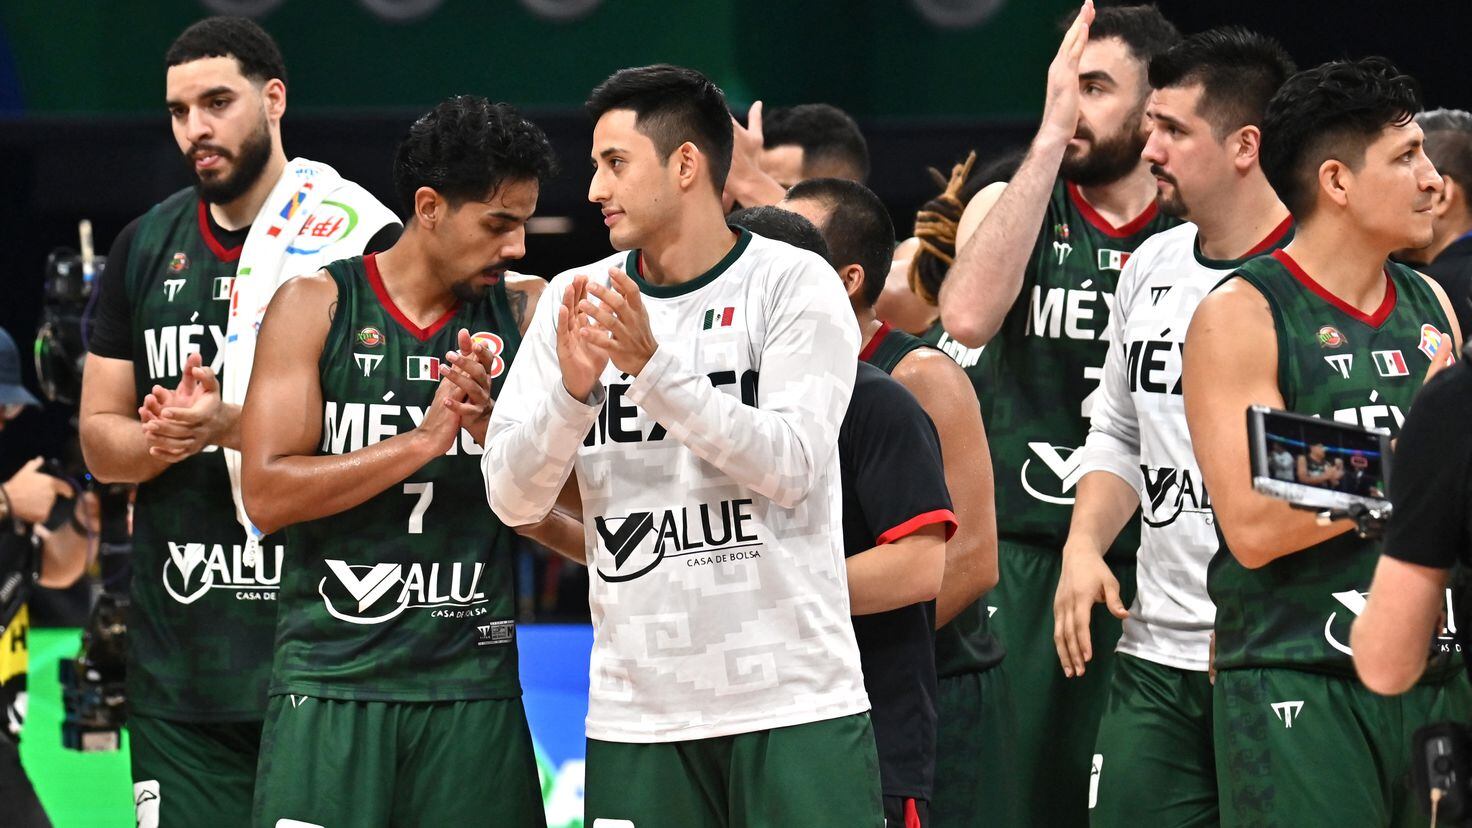 Mexico nurse their injuries against New Zealand at the FIBA ​​World Cup